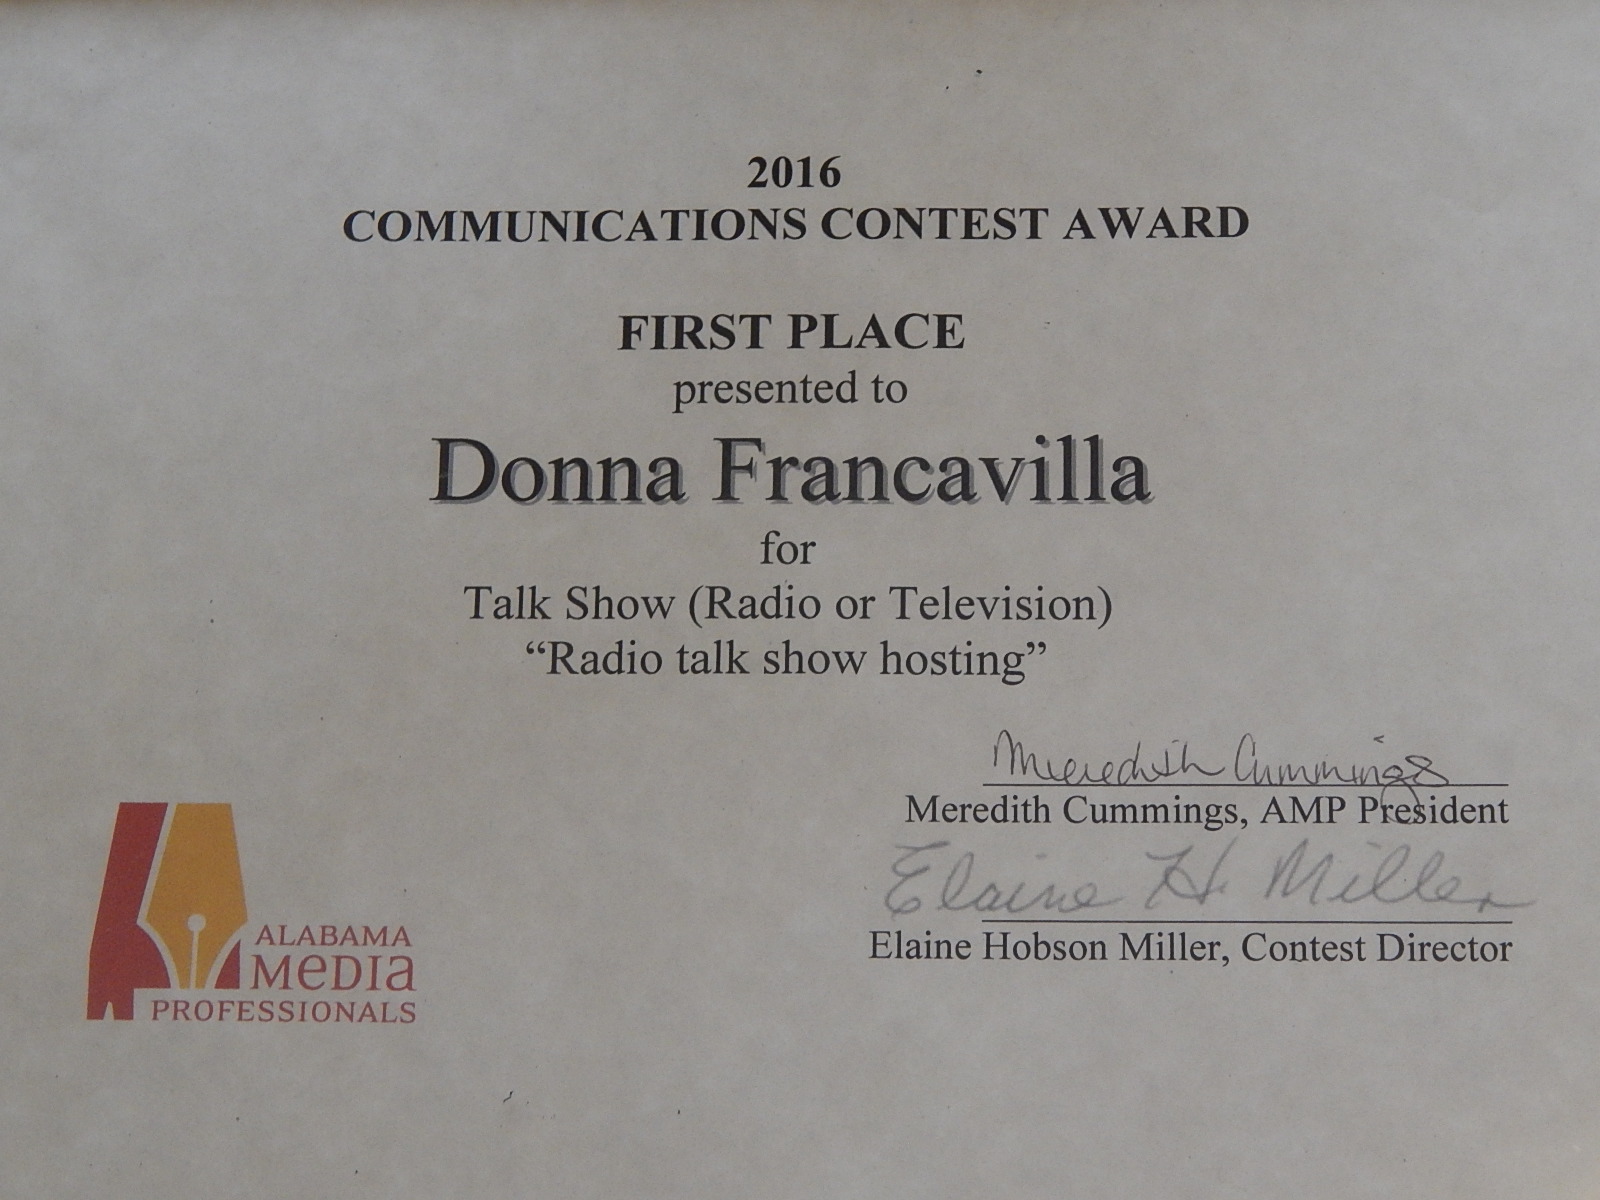 2016 Alabama Media Professionals Communications Contest Award – State Award – First Place presented to Donna Francavilla for Talk Show (Radio or Television) “Radio Talk Show Hosting”